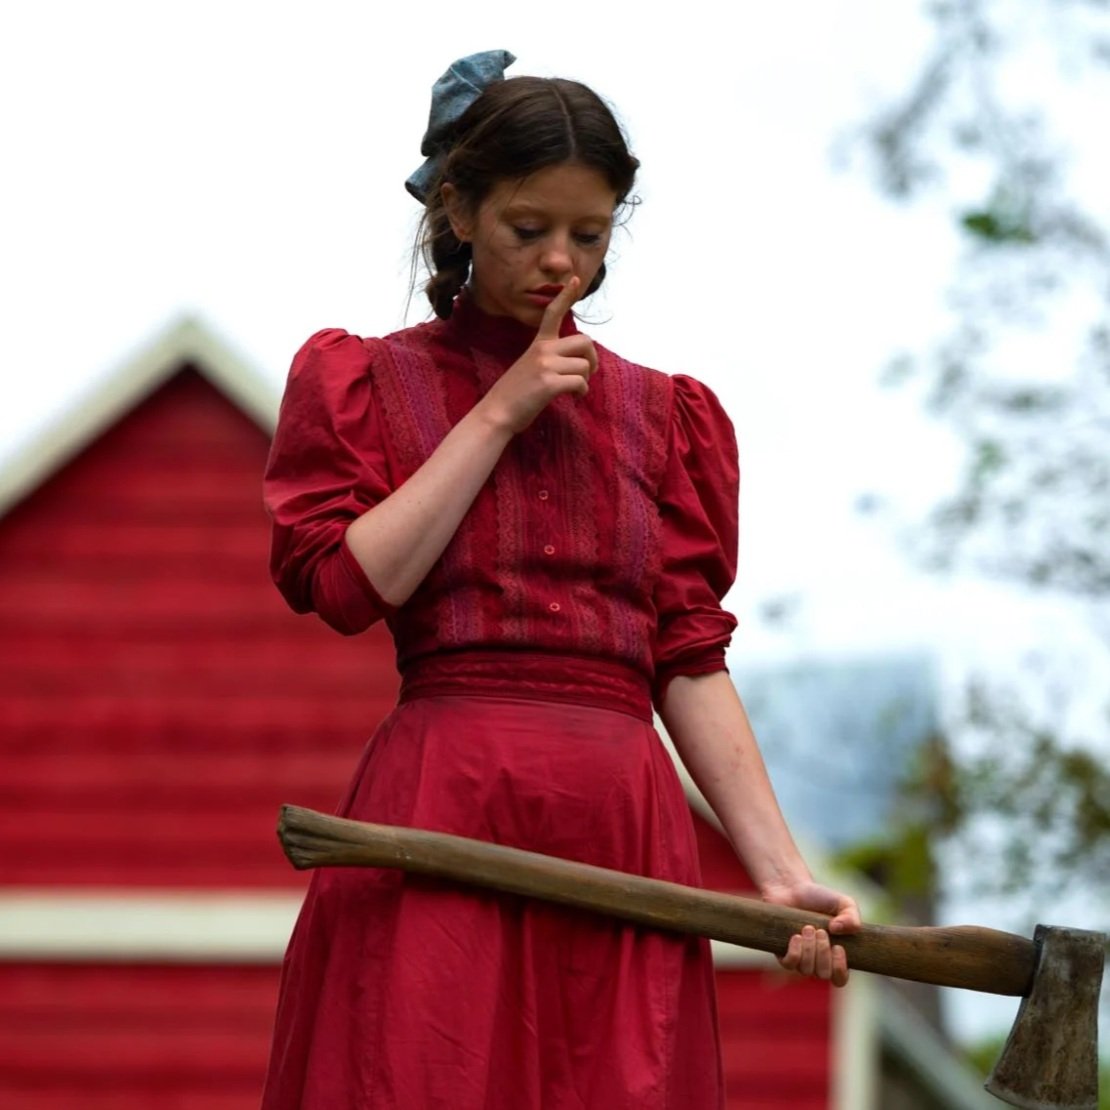  Still from the movie, pearl: Woman holding an axe looking down with a finger on her mouth shushing 